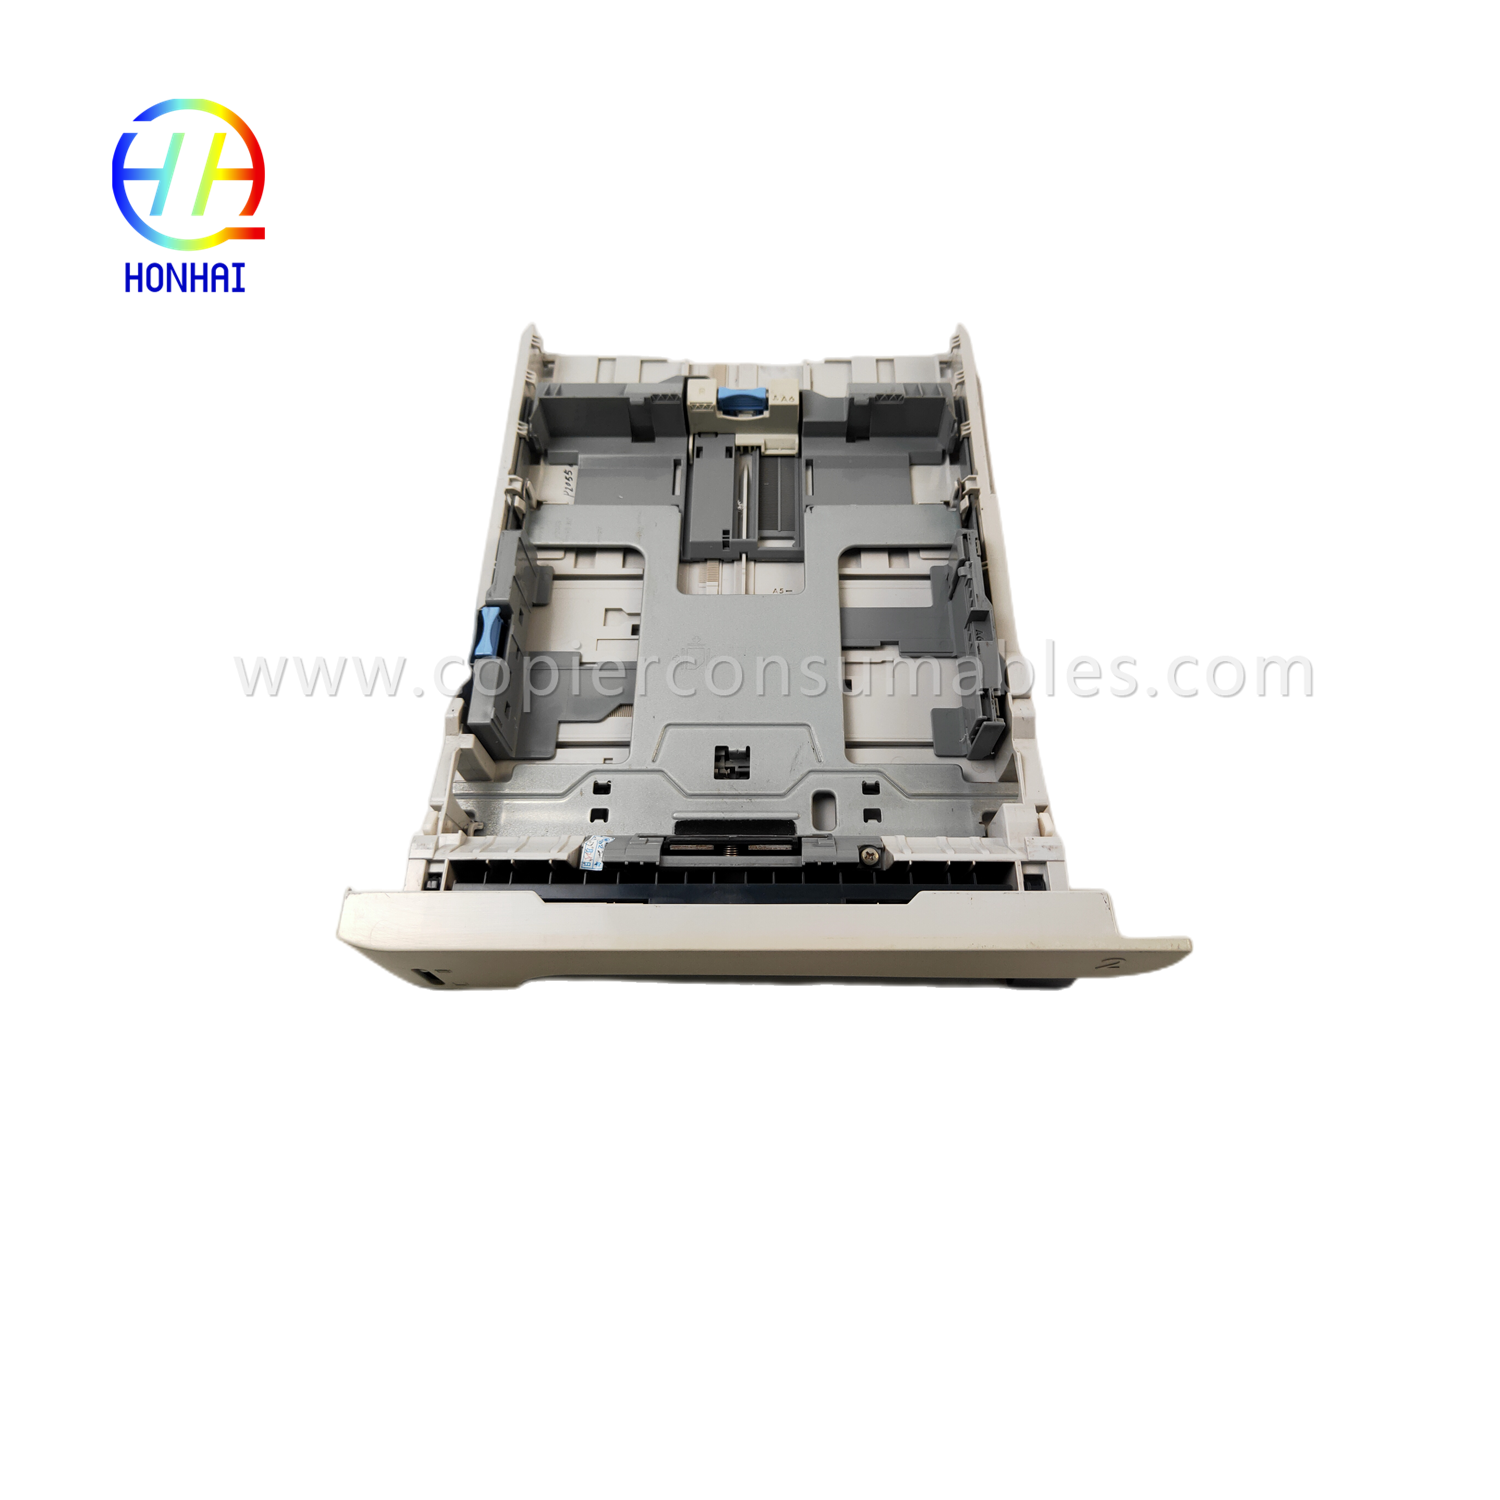 https://www.copierconsumables.com/paper-tray-assemble-for-xerox-phaser-3320dni-workcentre-3315dn-3325dni-050n00650